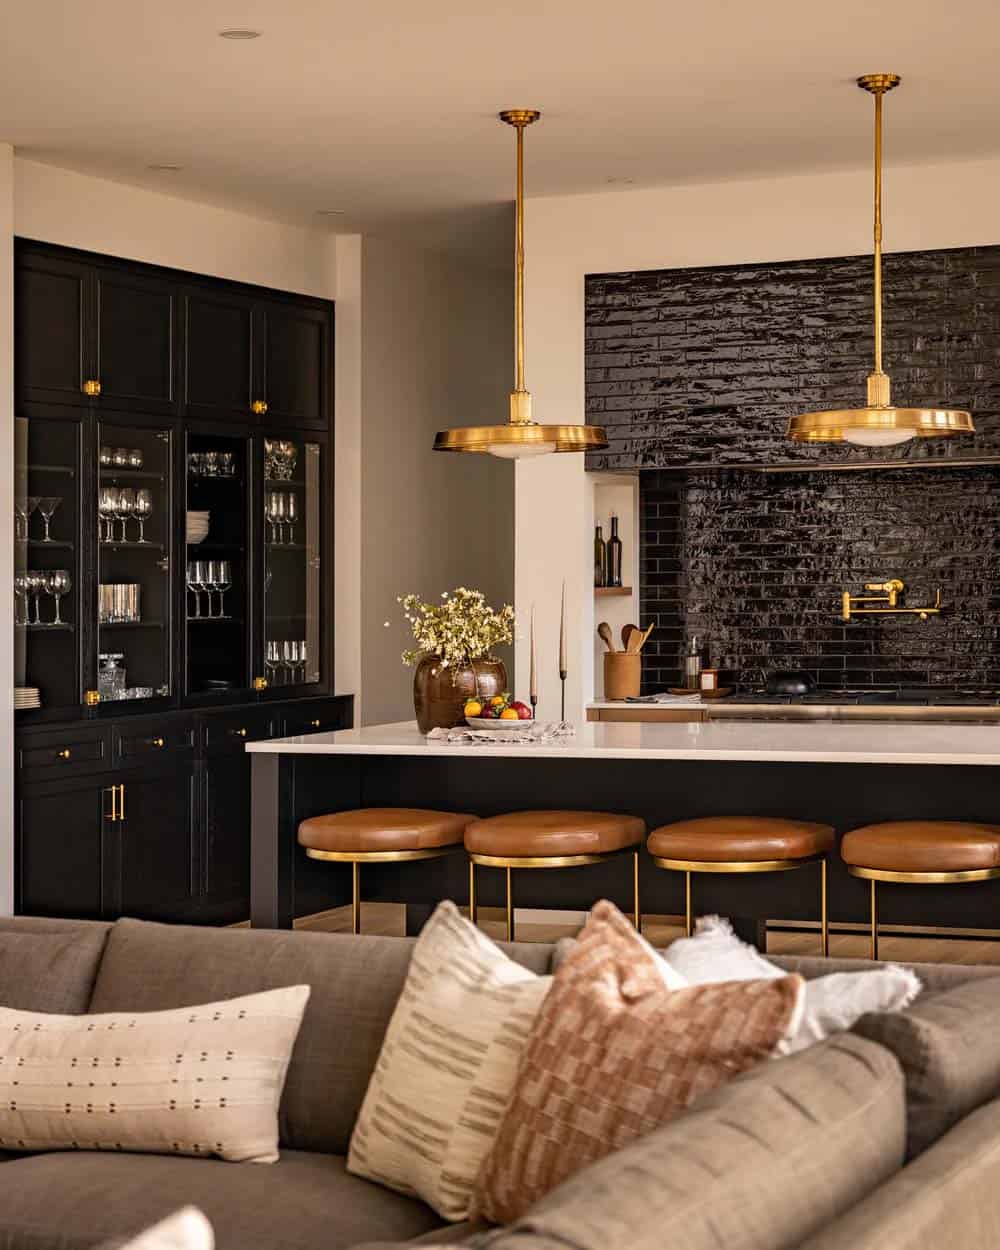 contemporary kitchen with a large island and black backsplash tile